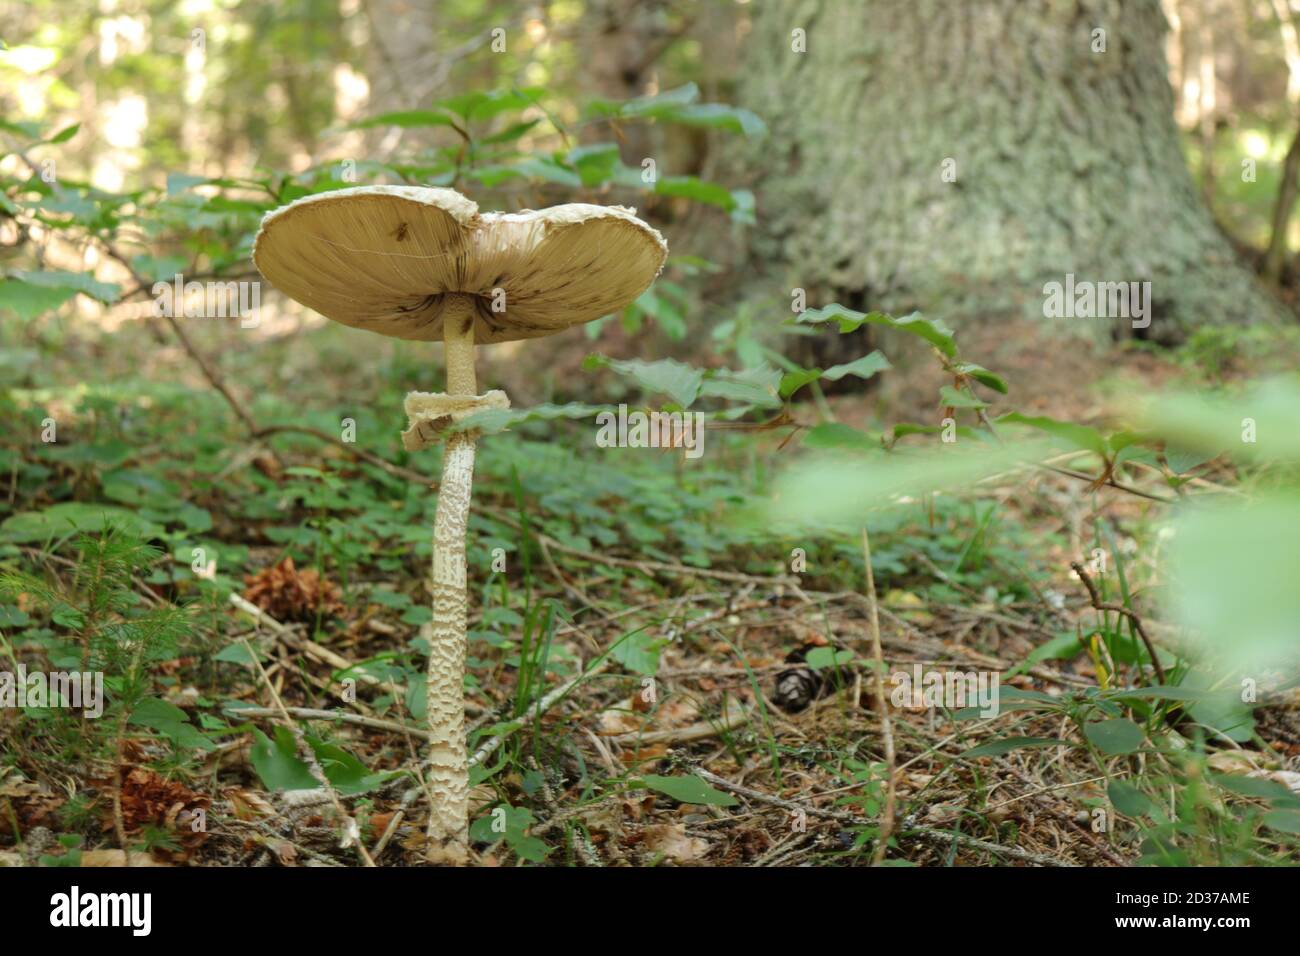 Macro shot of a mushroom in the forest Stock Photo